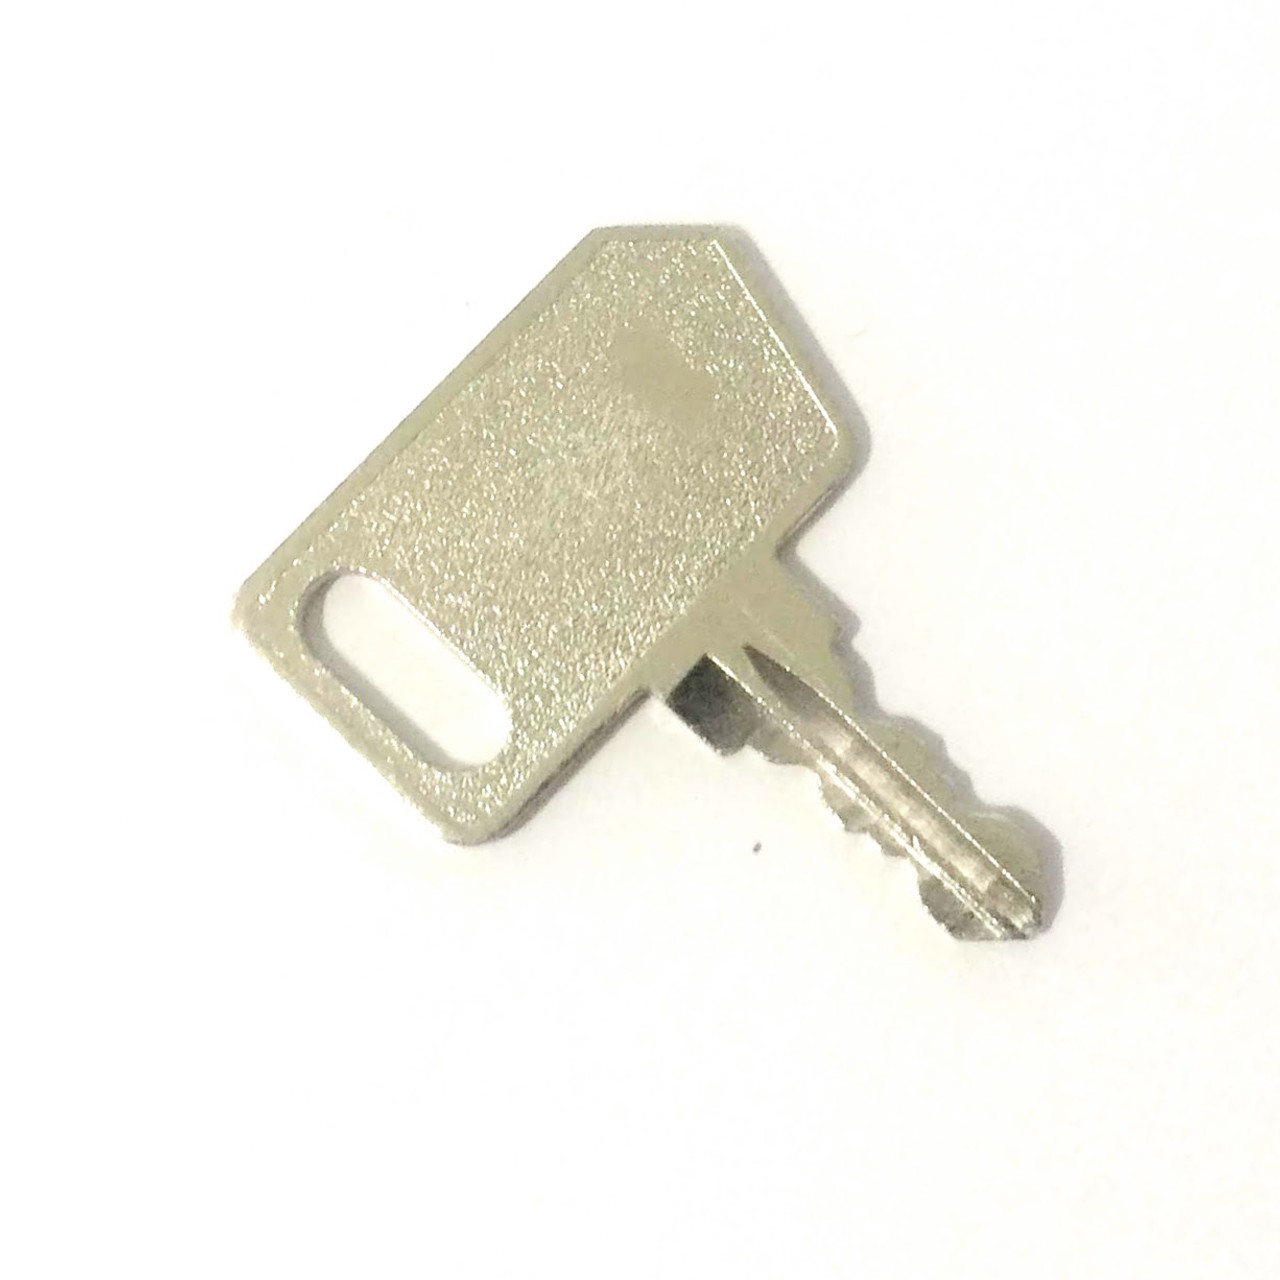 Same Tractor Ignition Key 04418435 